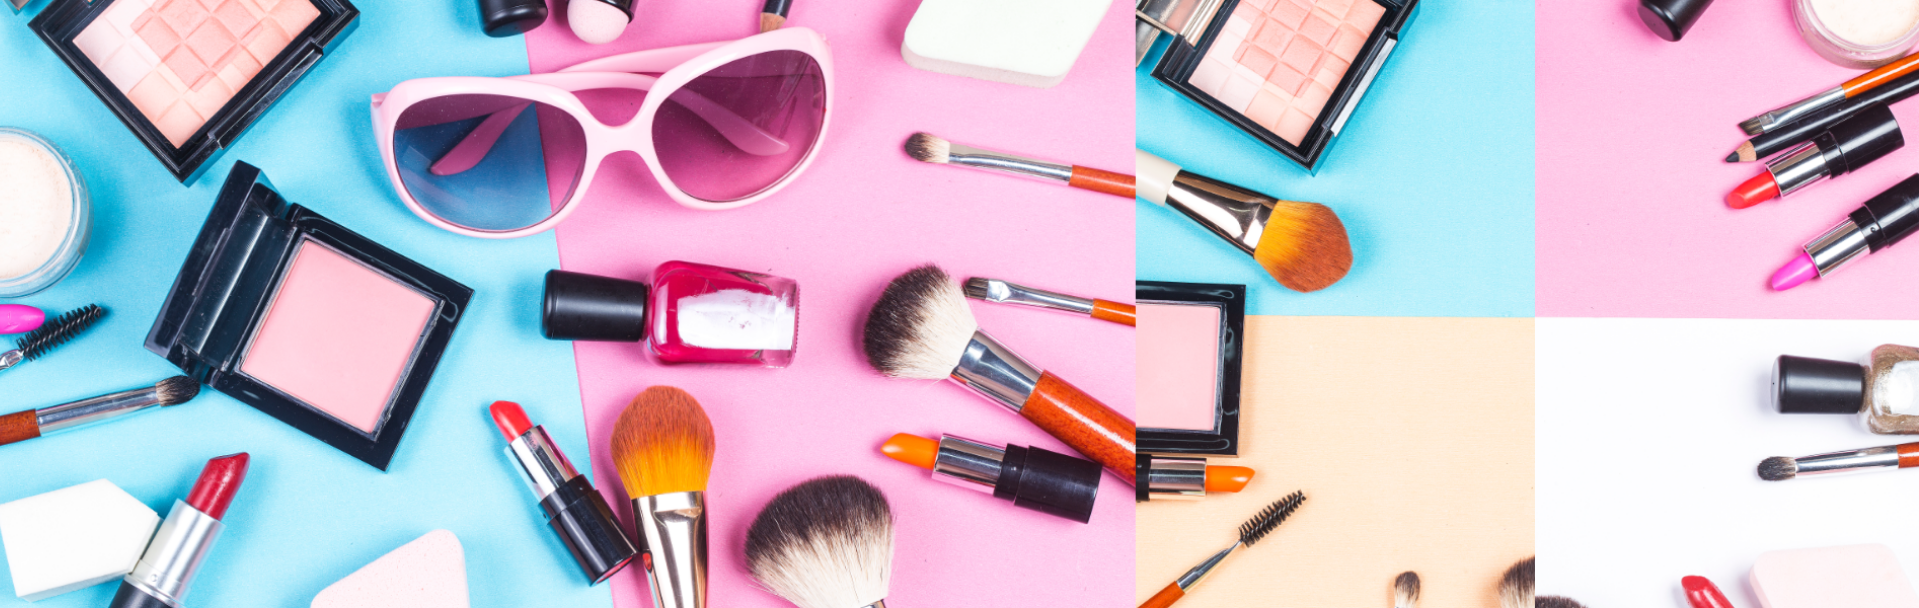 Cosmetics, beauty and personal care industry force and torque testing applications and solutions